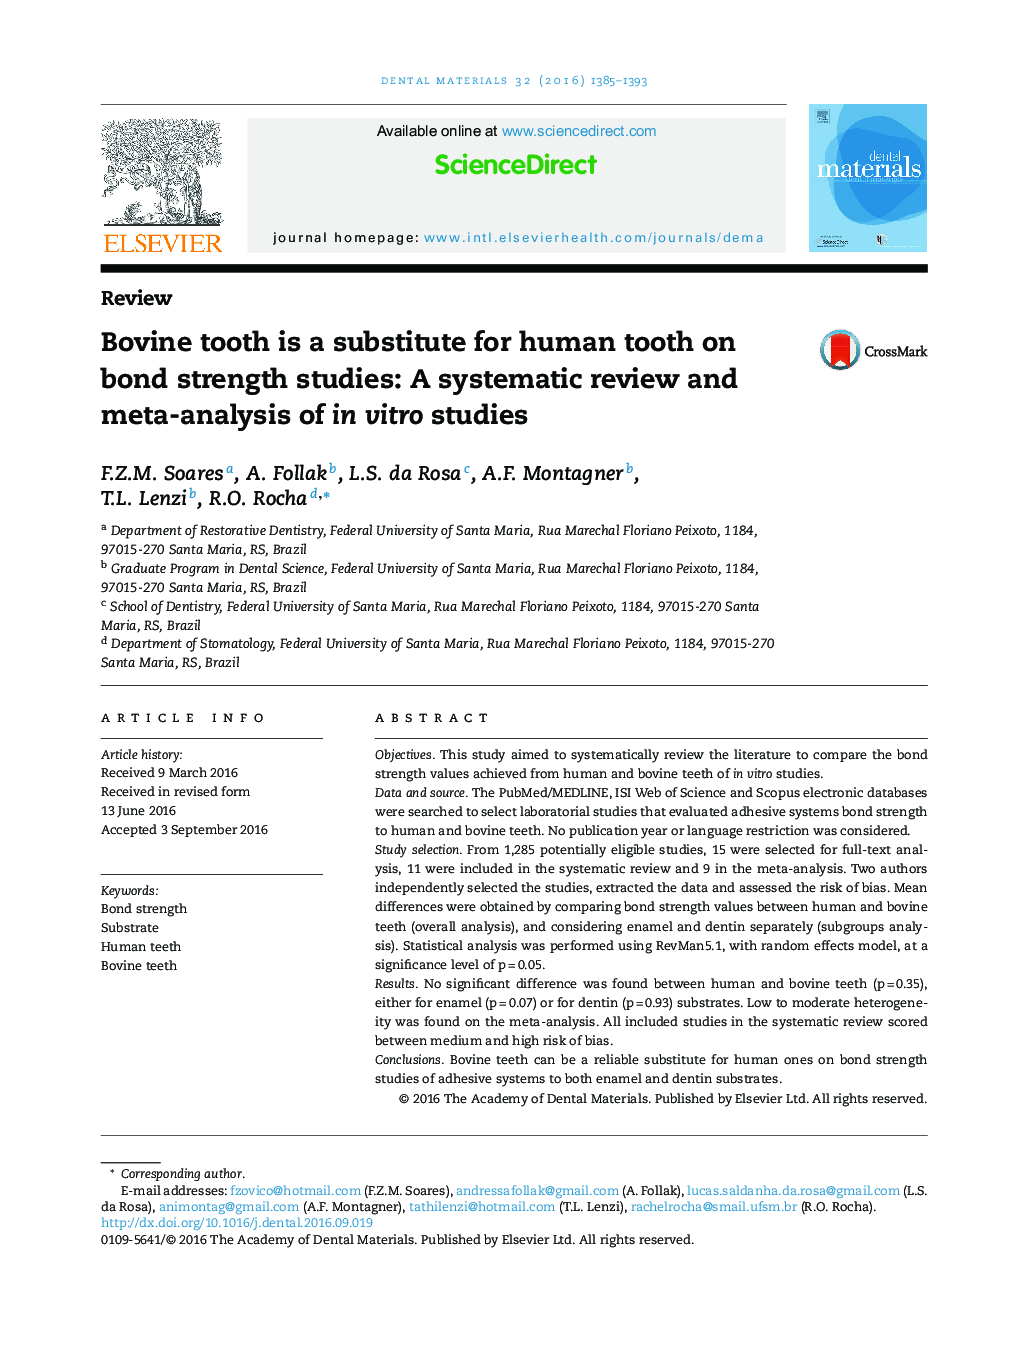 Bovine tooth is a substitute for human tooth on bond strength studies: A systematic review and meta-analysis of in vitro studies